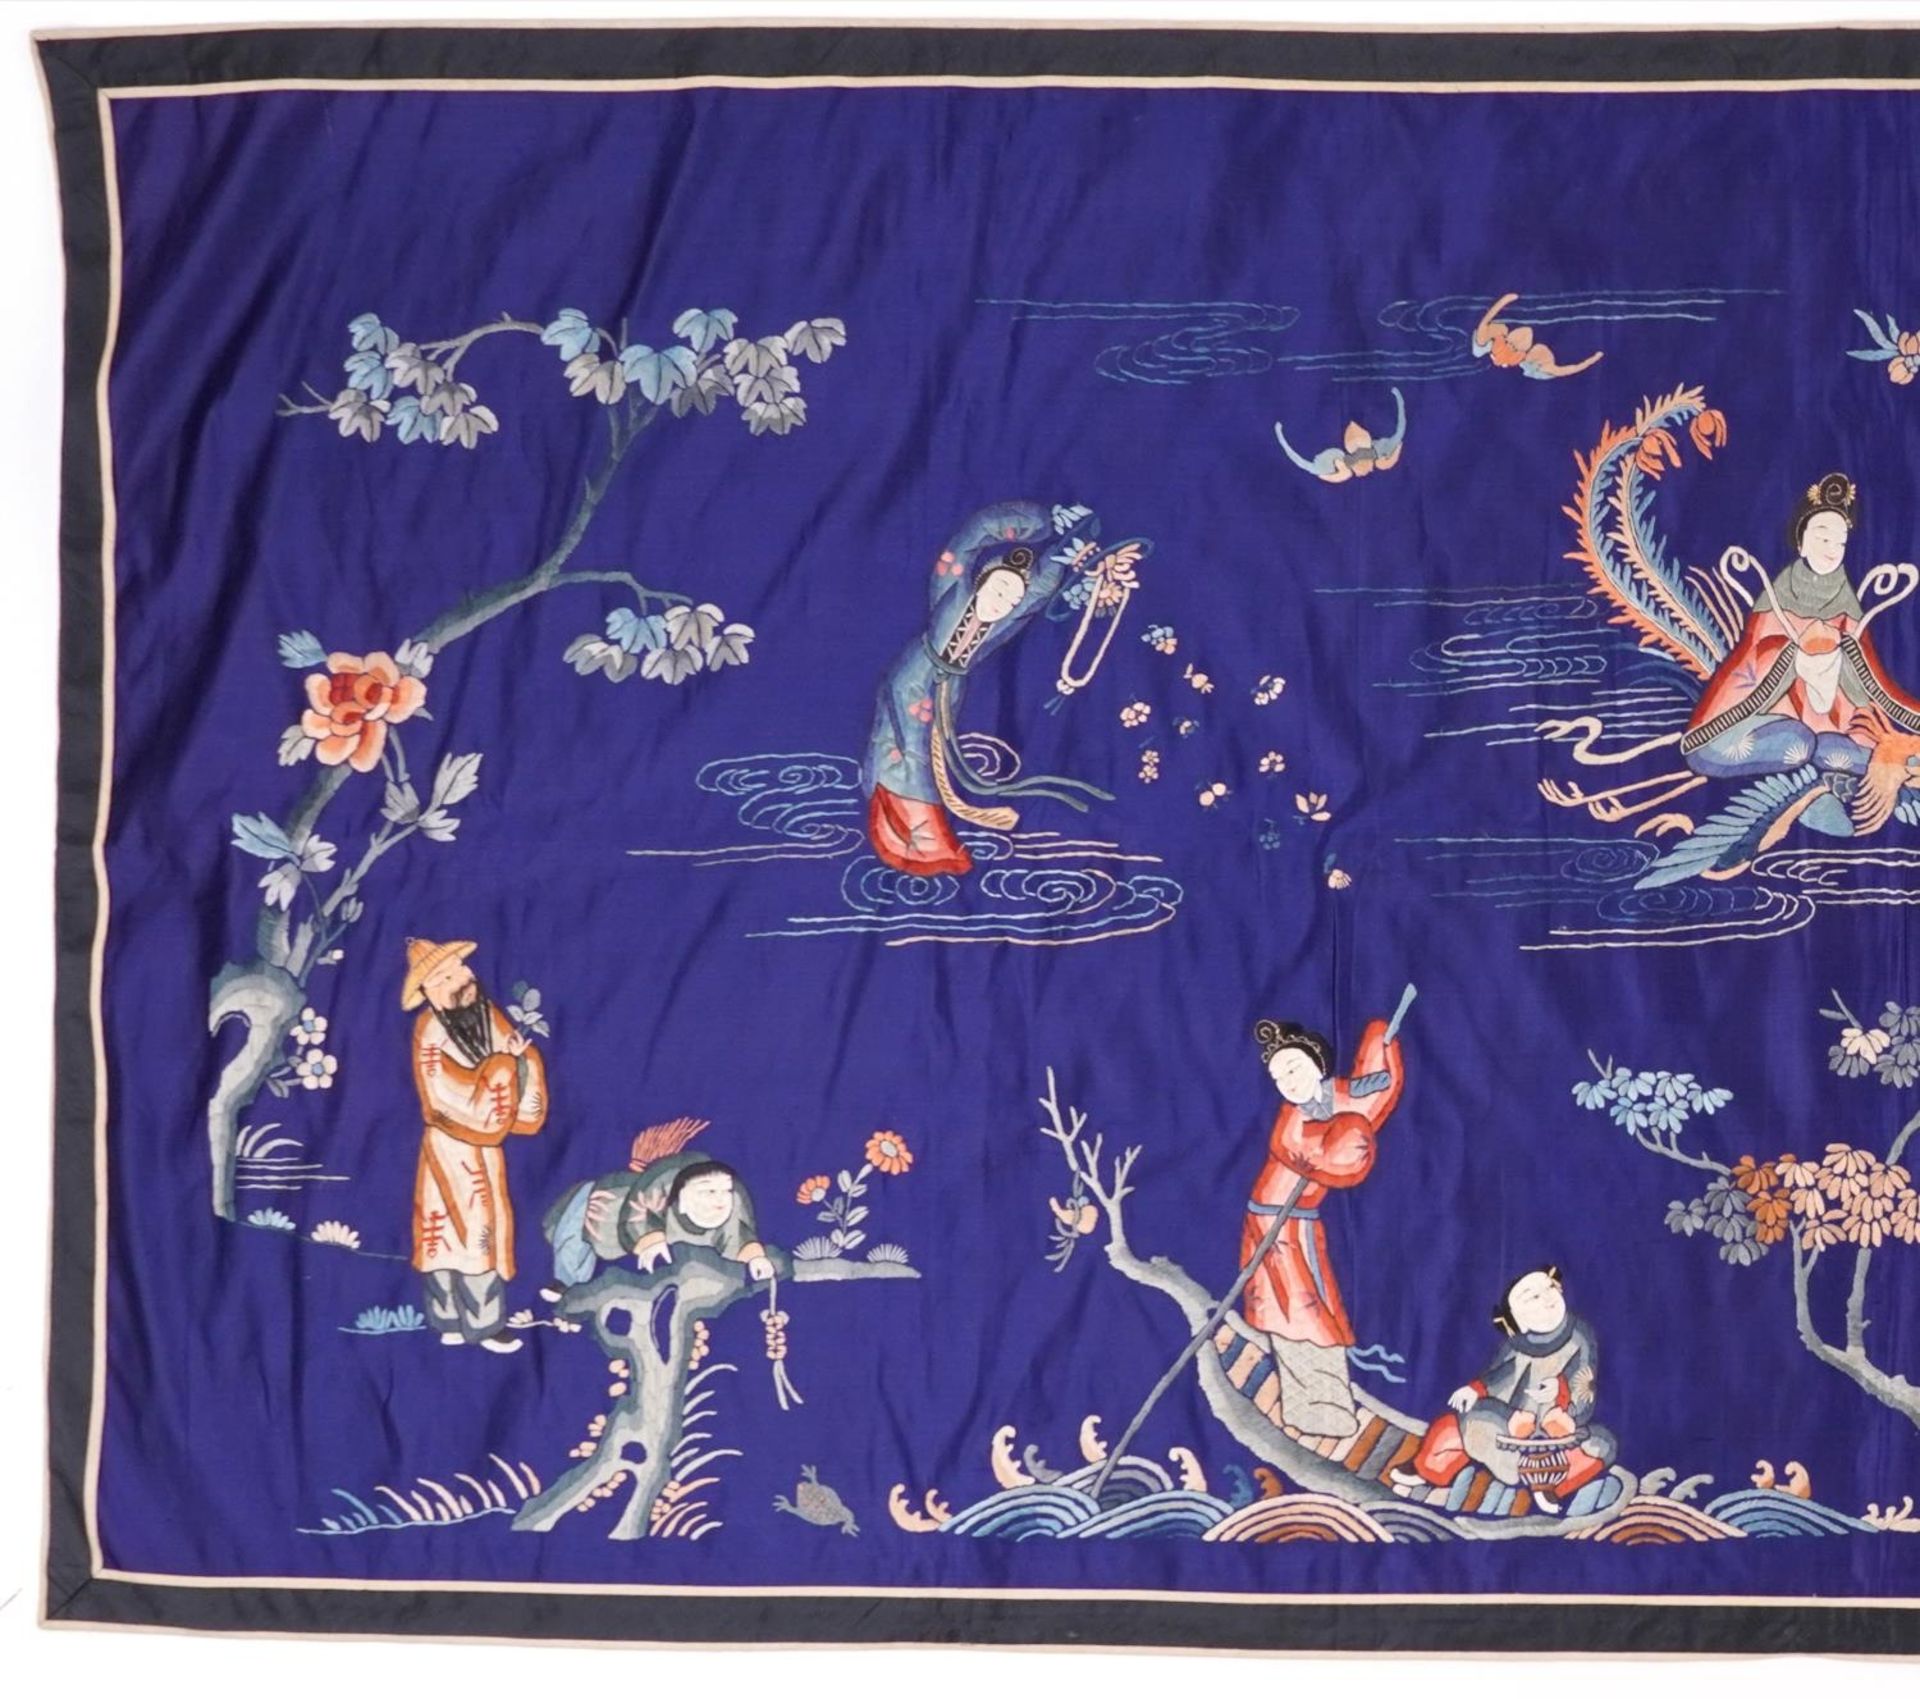 Large Chinese silk textile embroidered with an emperor amongst Geishas and figures, one riding a - Image 2 of 4